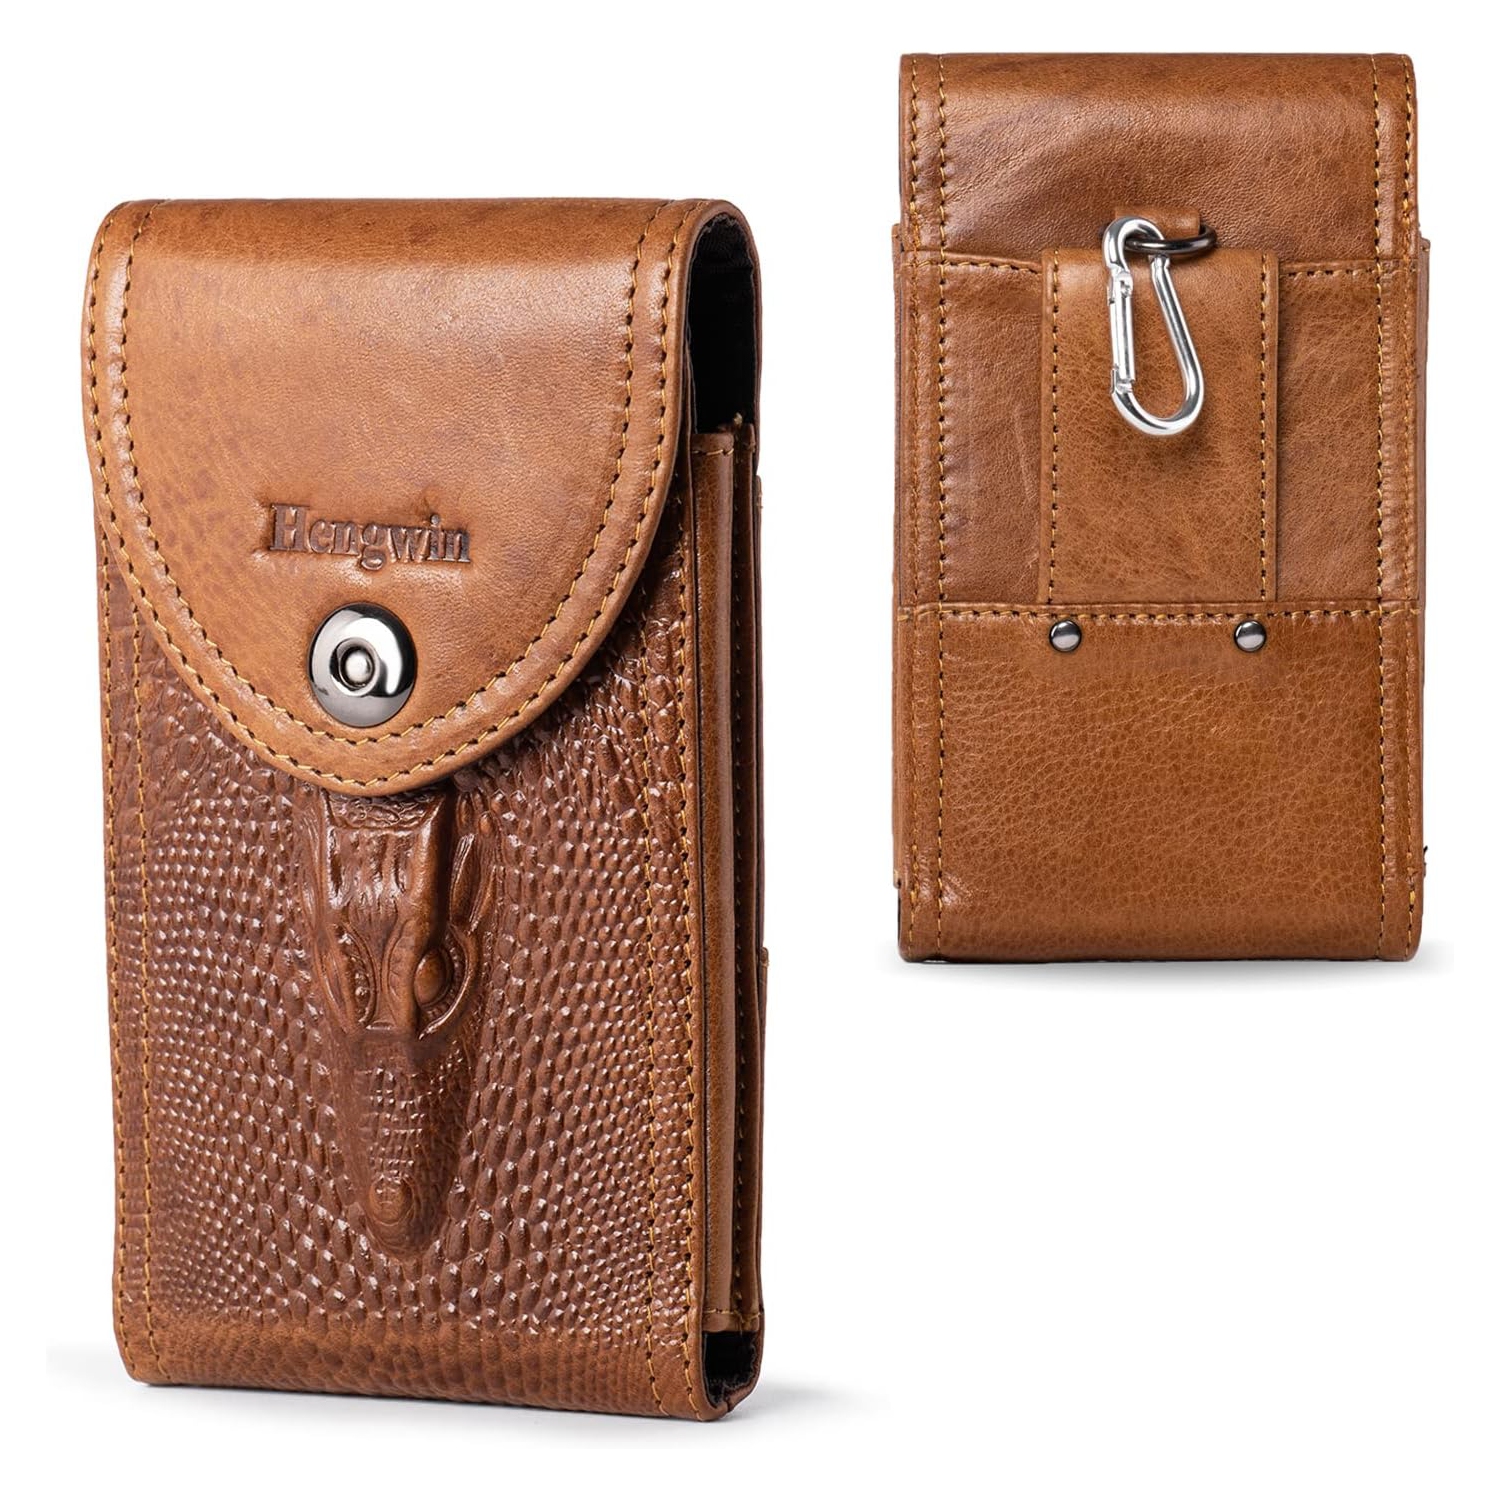 Genuine Leather Cell Phone Pouch for iPhone 12 Pro Max Belt Case with Belt Clip Loop, Men Belt Holder